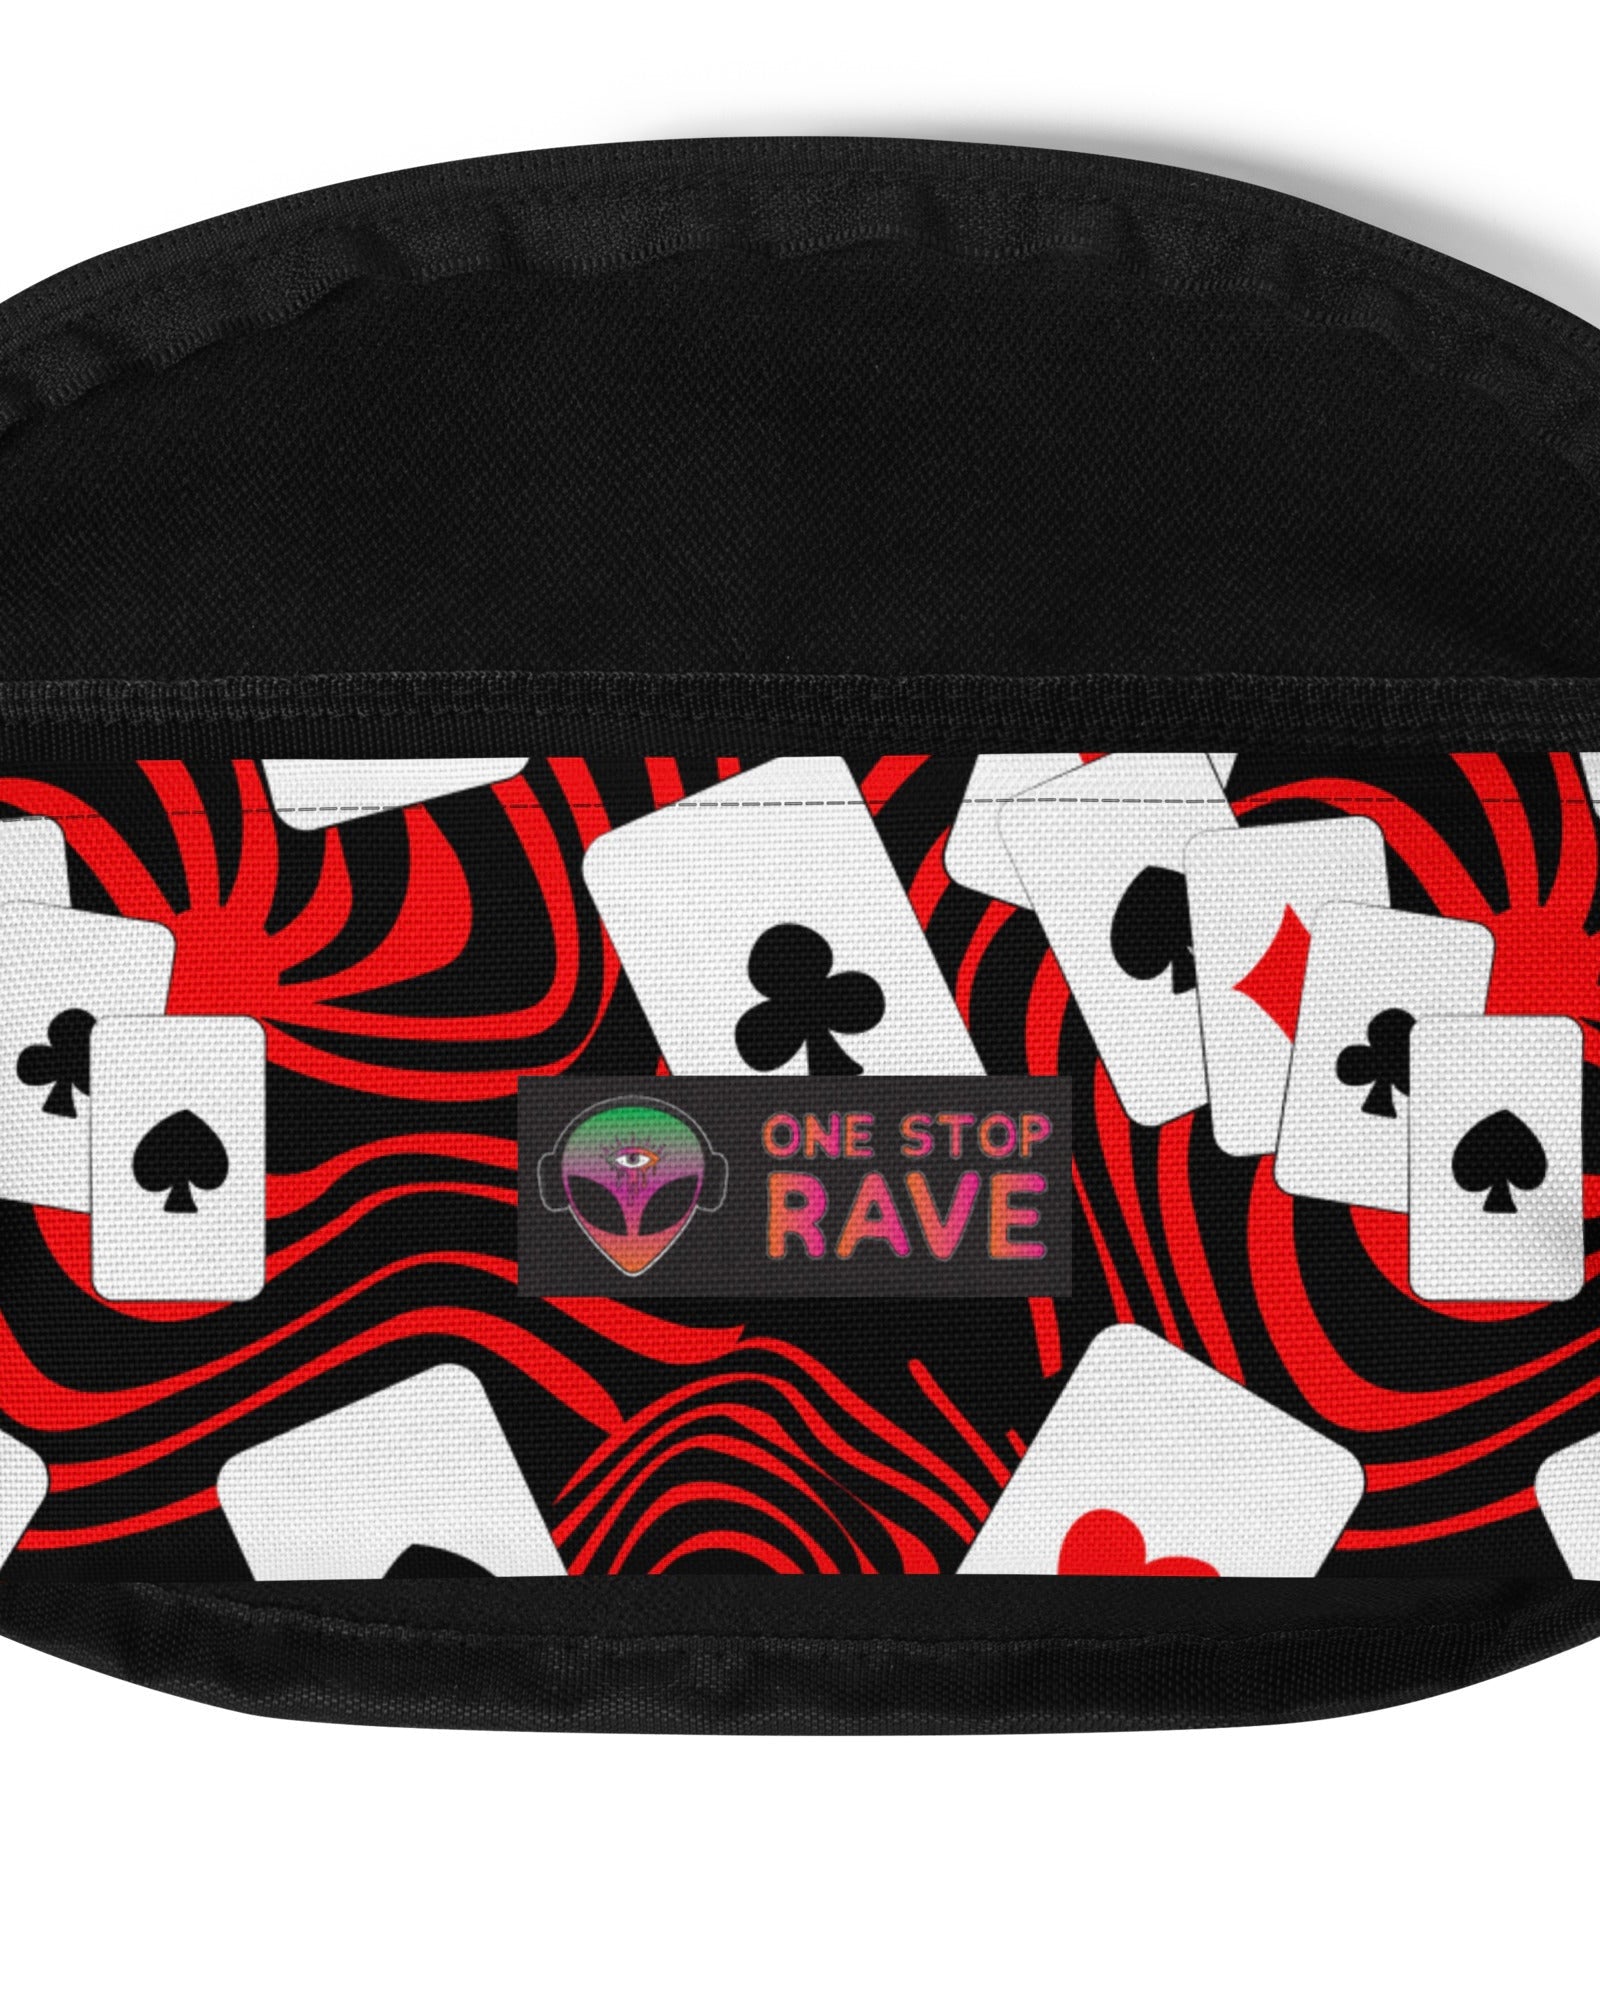 Off With Your Head Fanny Pack, Fanny Pack, - One Stop Rave